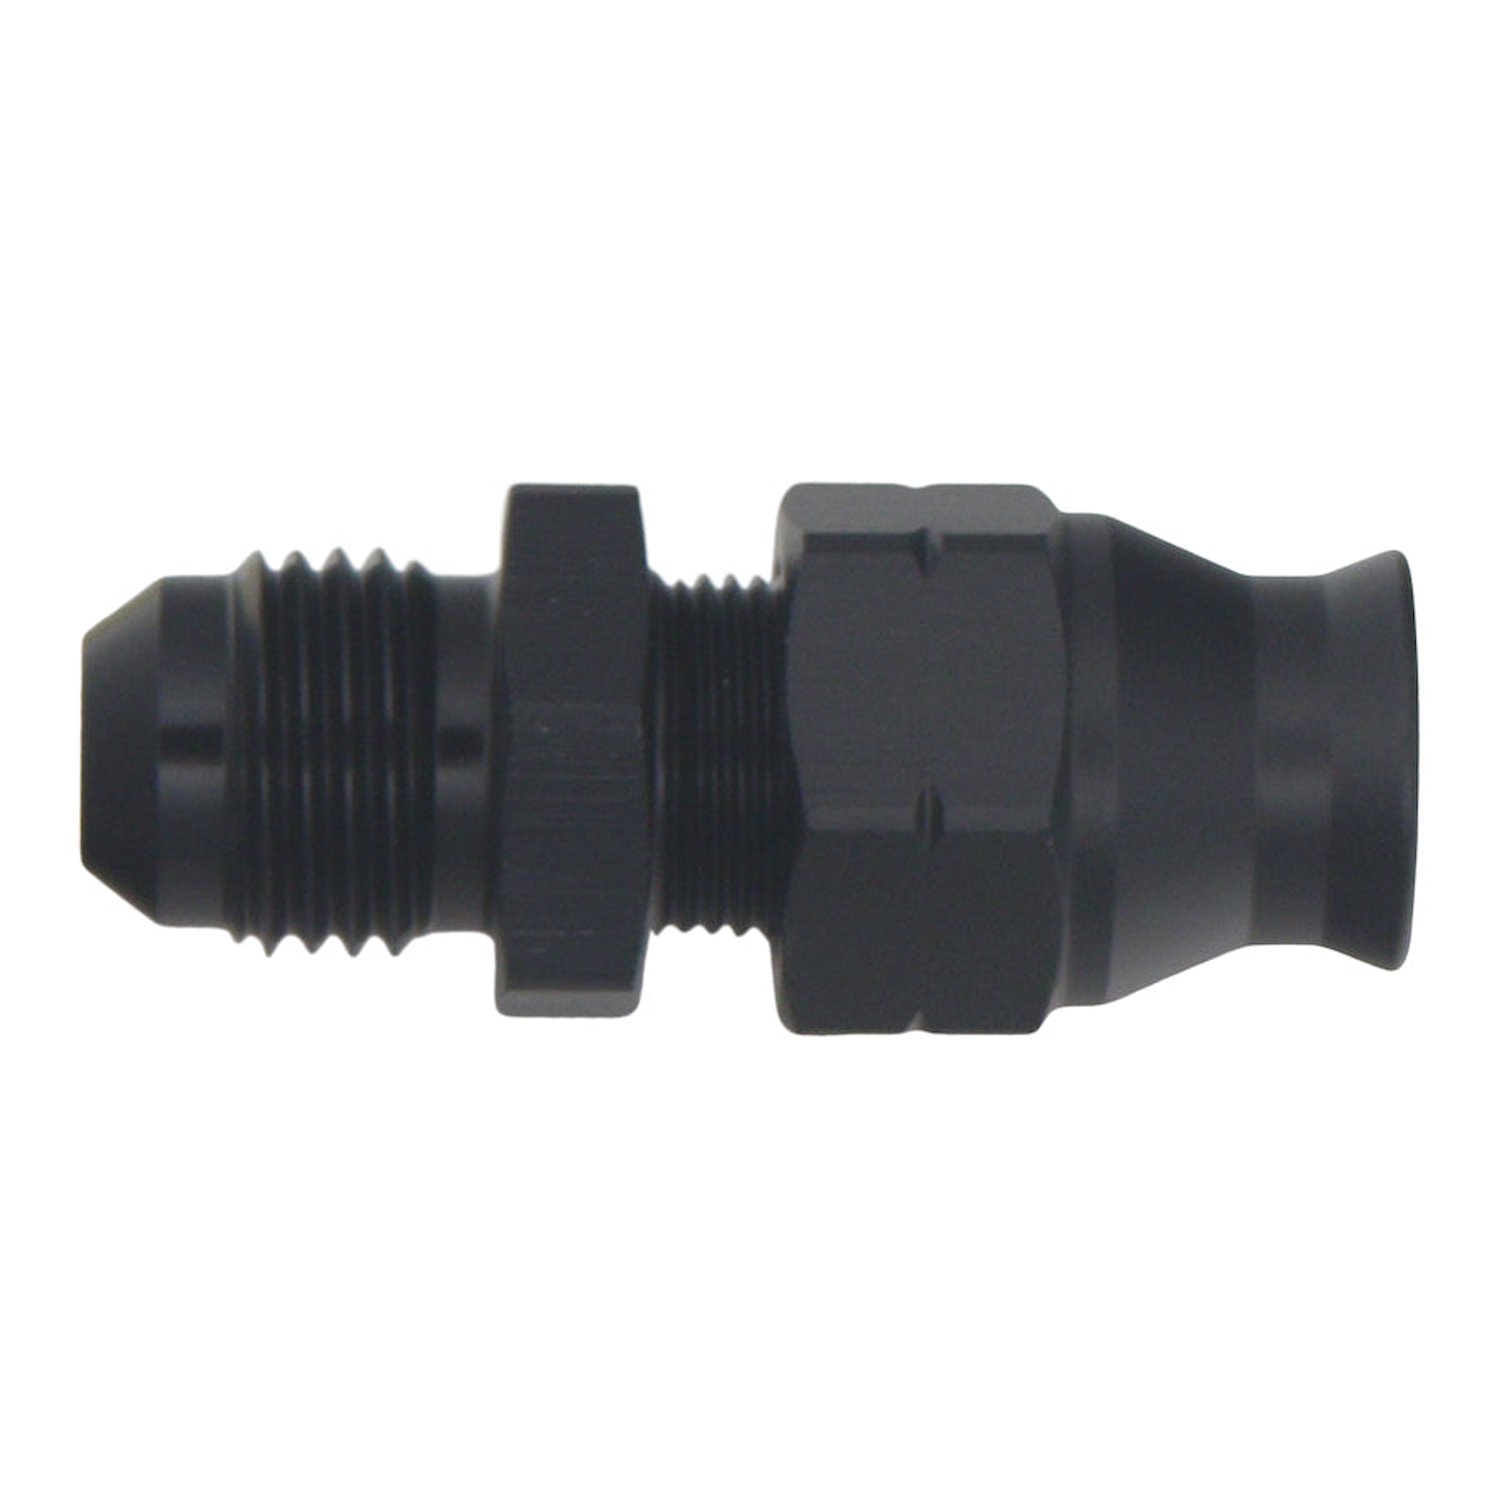 6020108B 6AN Male Flare to 5/16 Inch Hardline Compression Adapter (Incl 1 Olive Insert) Anodized Matte Black